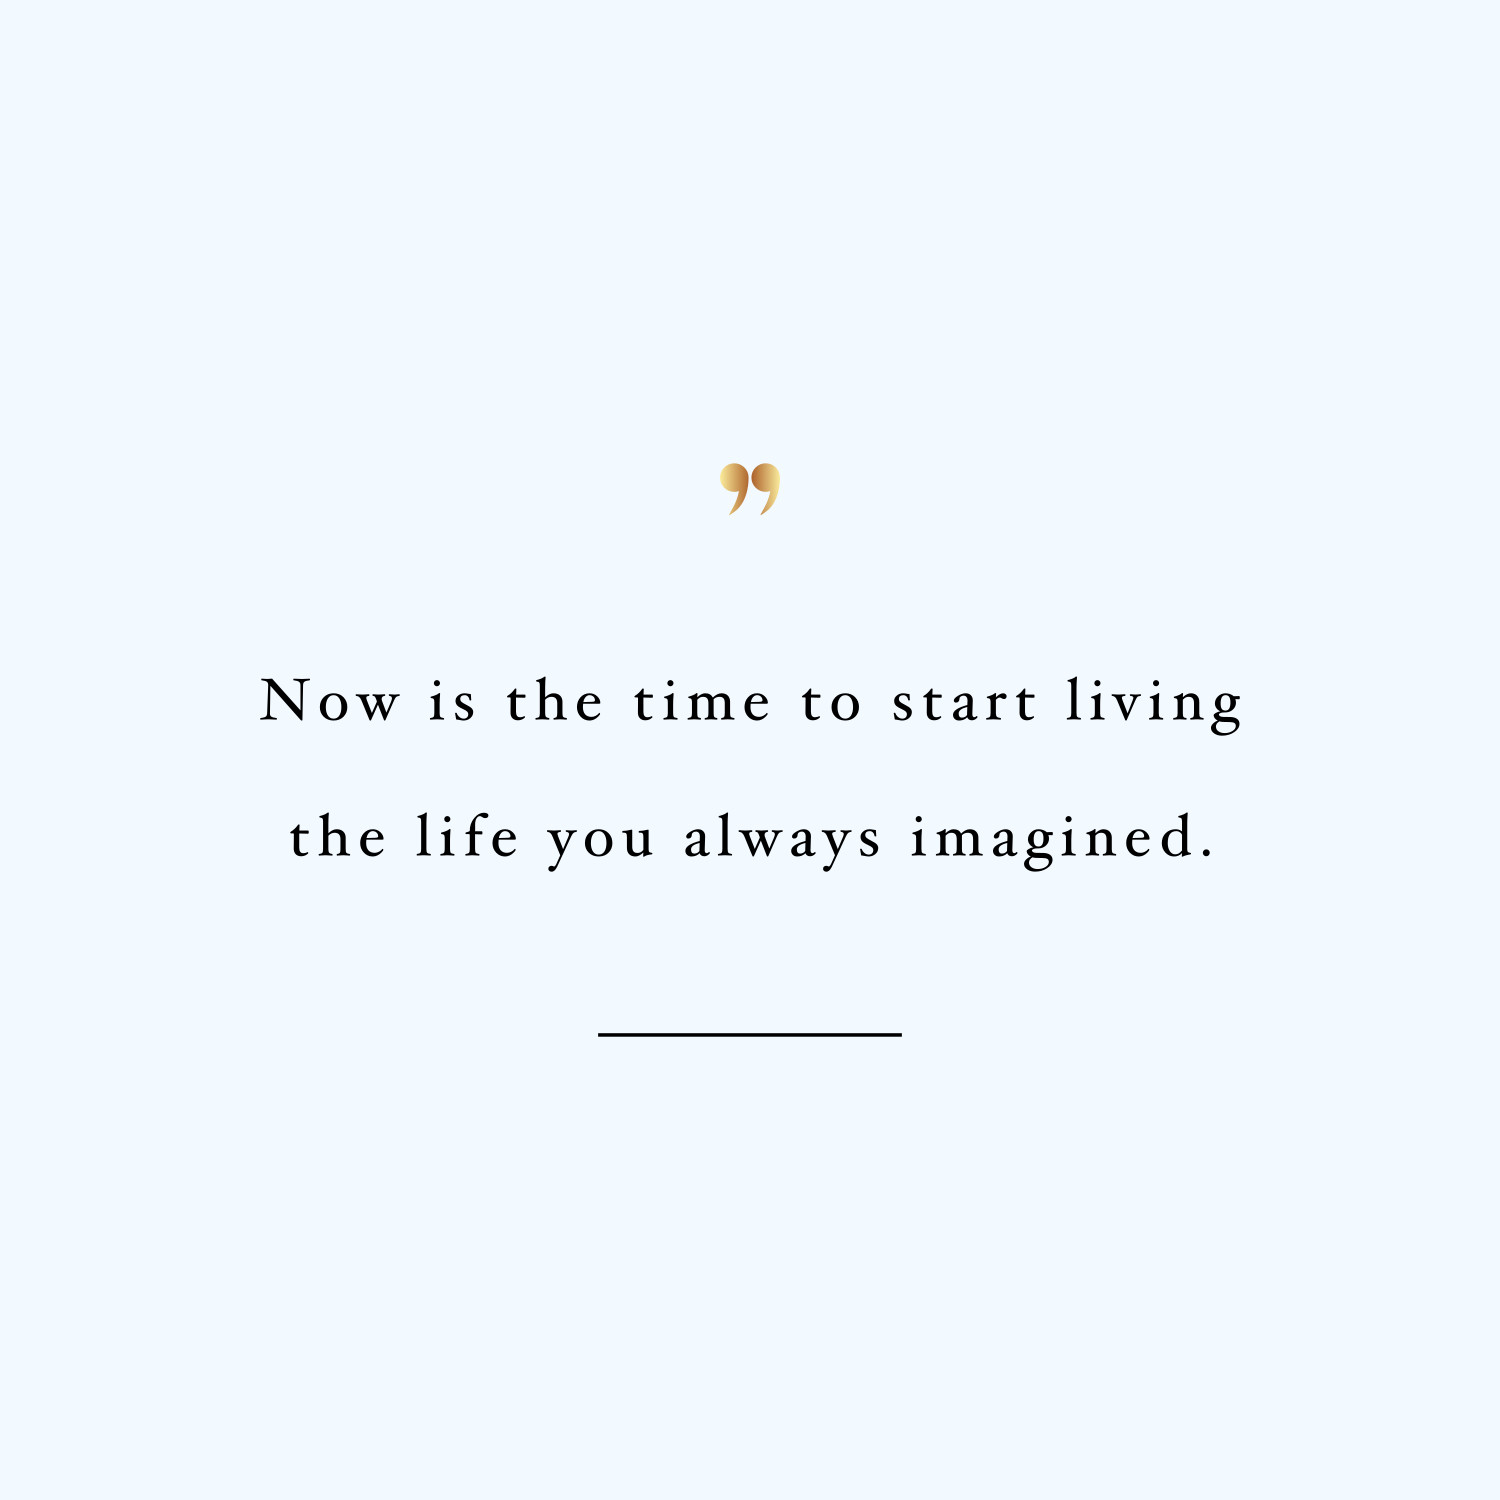 Now is the time! Browse our collection of exercise and fitness motivational quotes and get instant weight loss and training inspiration. Transform positive thoughts into positive actions and get fit, healthy and happy! https://www.spotebi.com/workout-motivation/now-is-the-time/